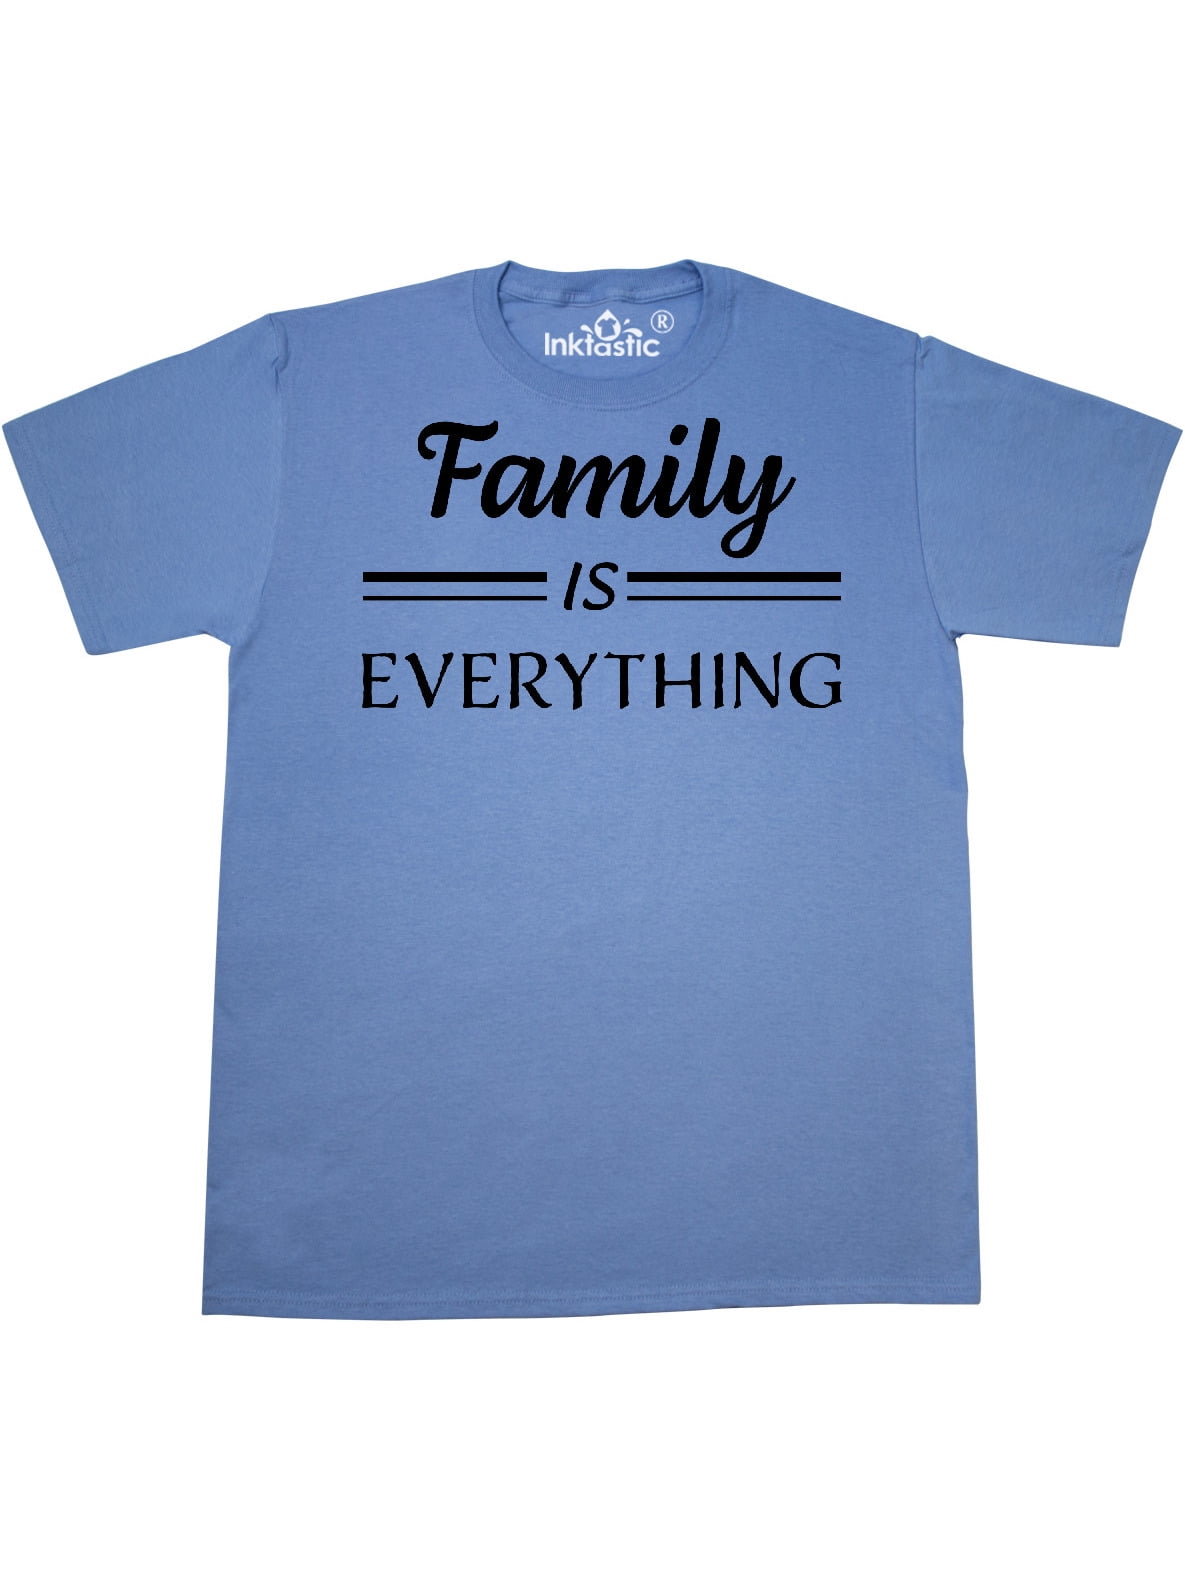 Inktastic Family Is Everything in Black Text T-Shirt - Walmart.com